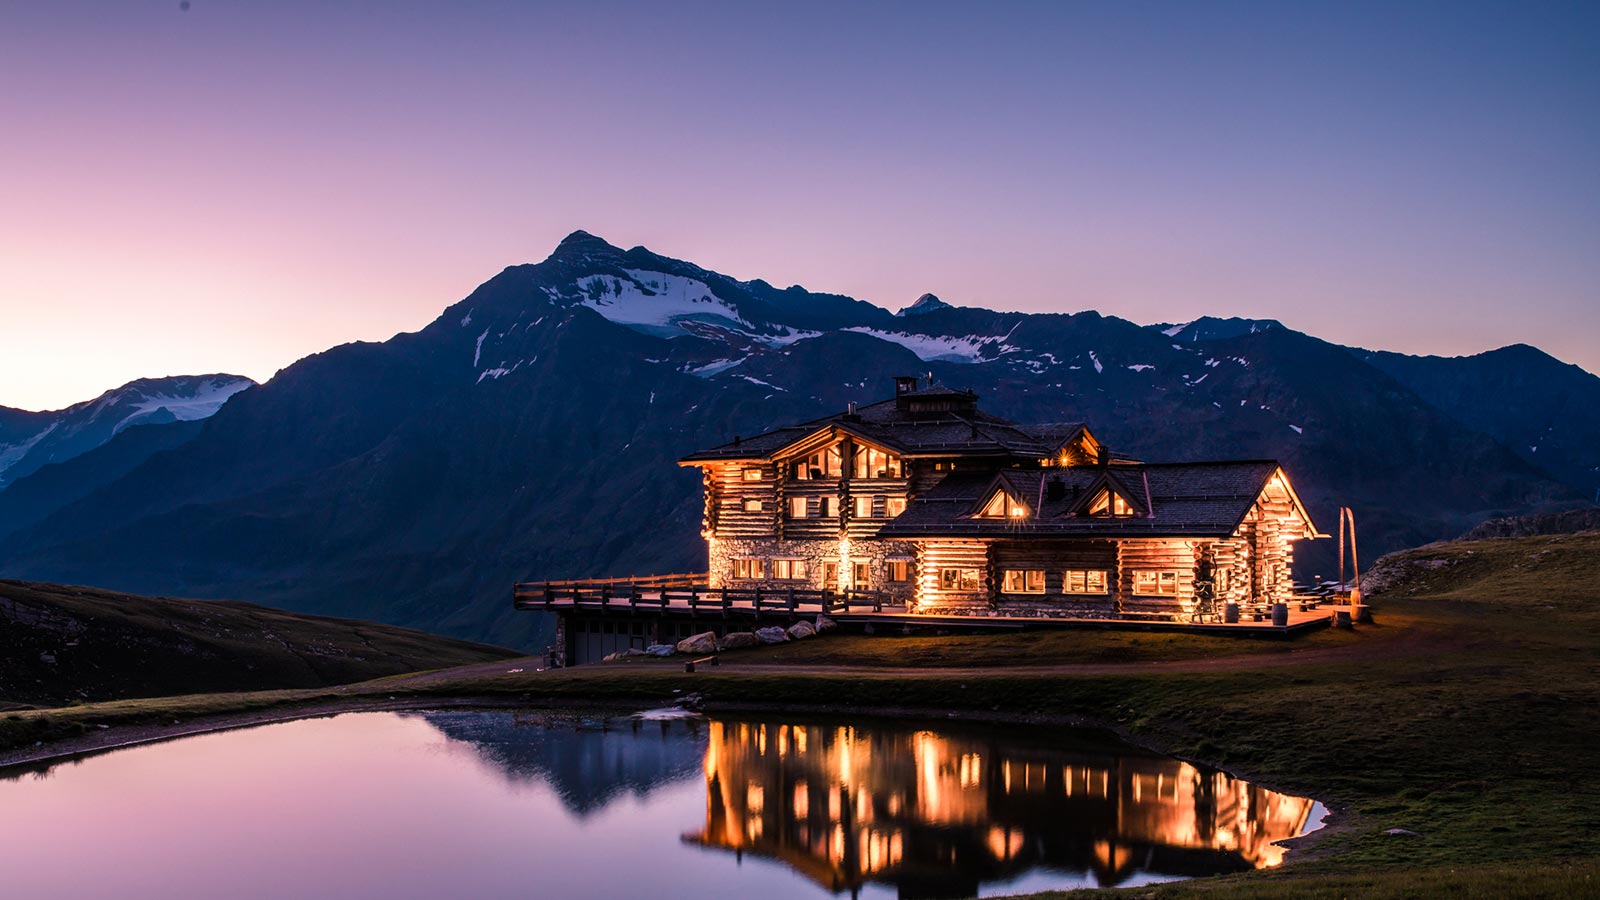 The mountain lodge at night illuminated by lights near the natural park of Stelvio